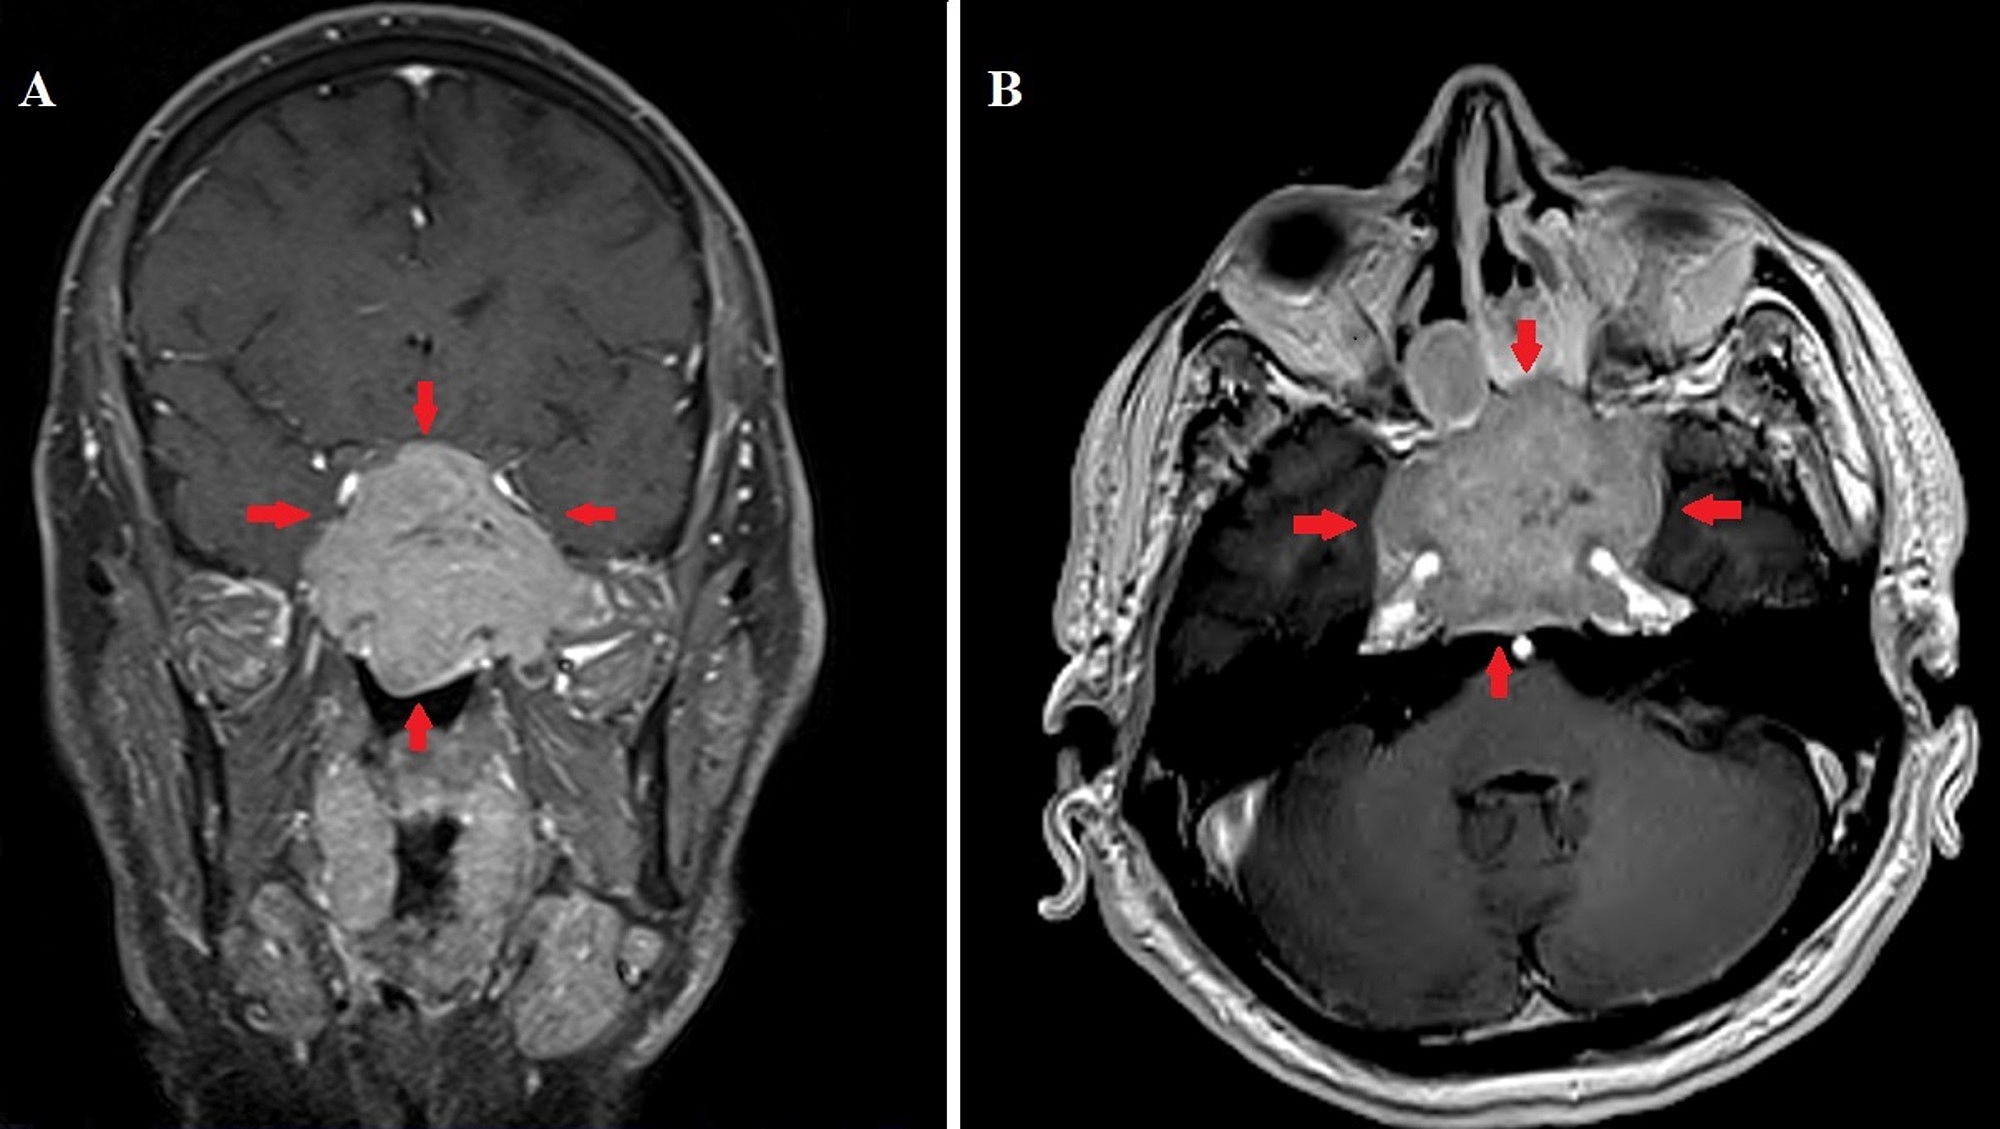 Cureus Carcinoid Tumor Arising From The Sphenoid Sinus Treated With Definitive Intensity Modulated Radiation Therapy A Case Report